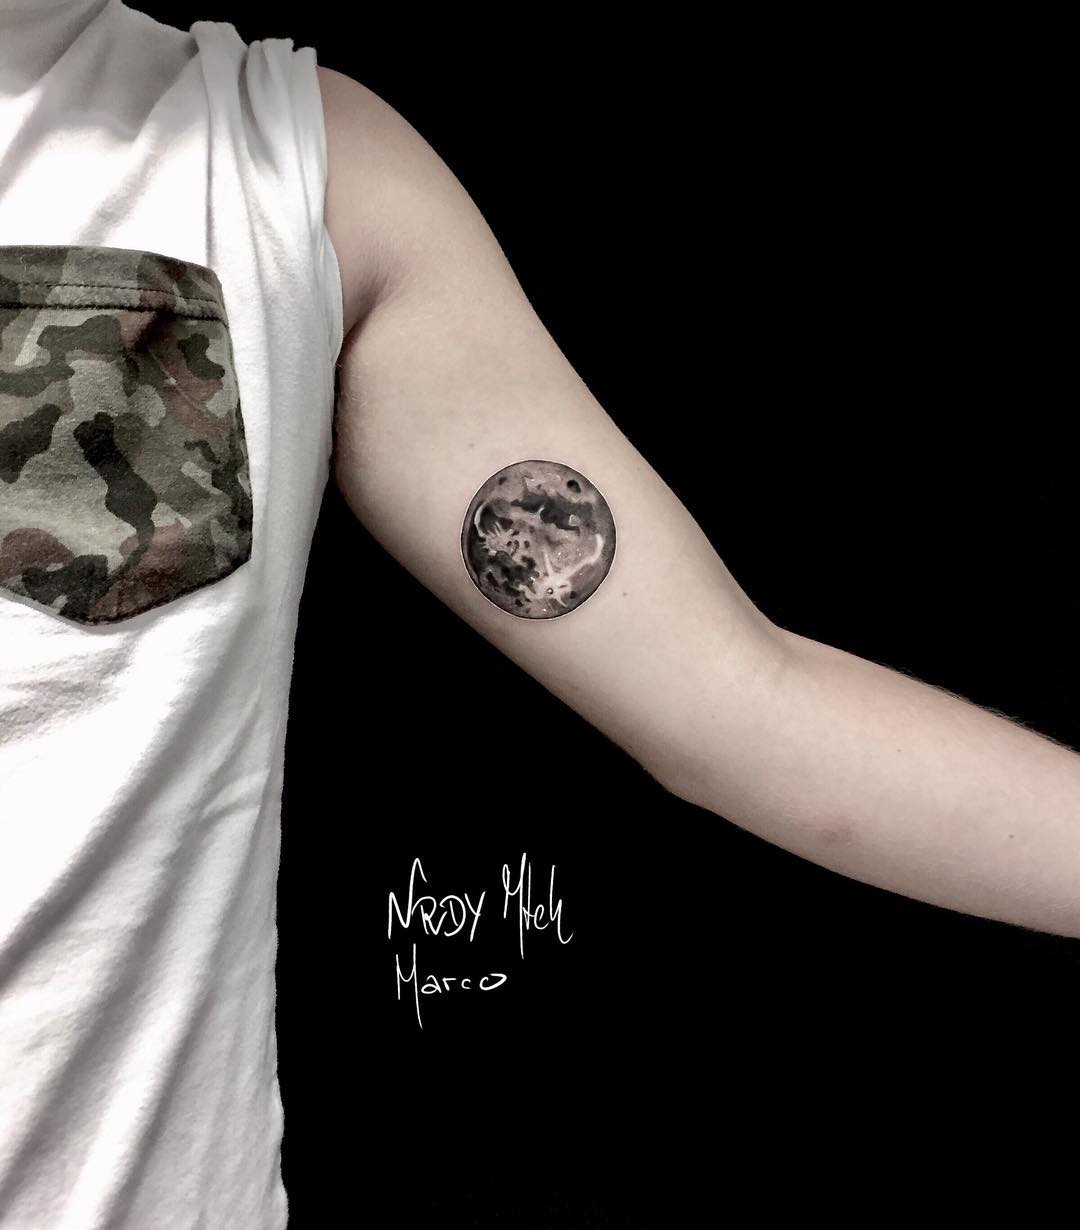 Full moon tattoo done by Nerdy Match Marco